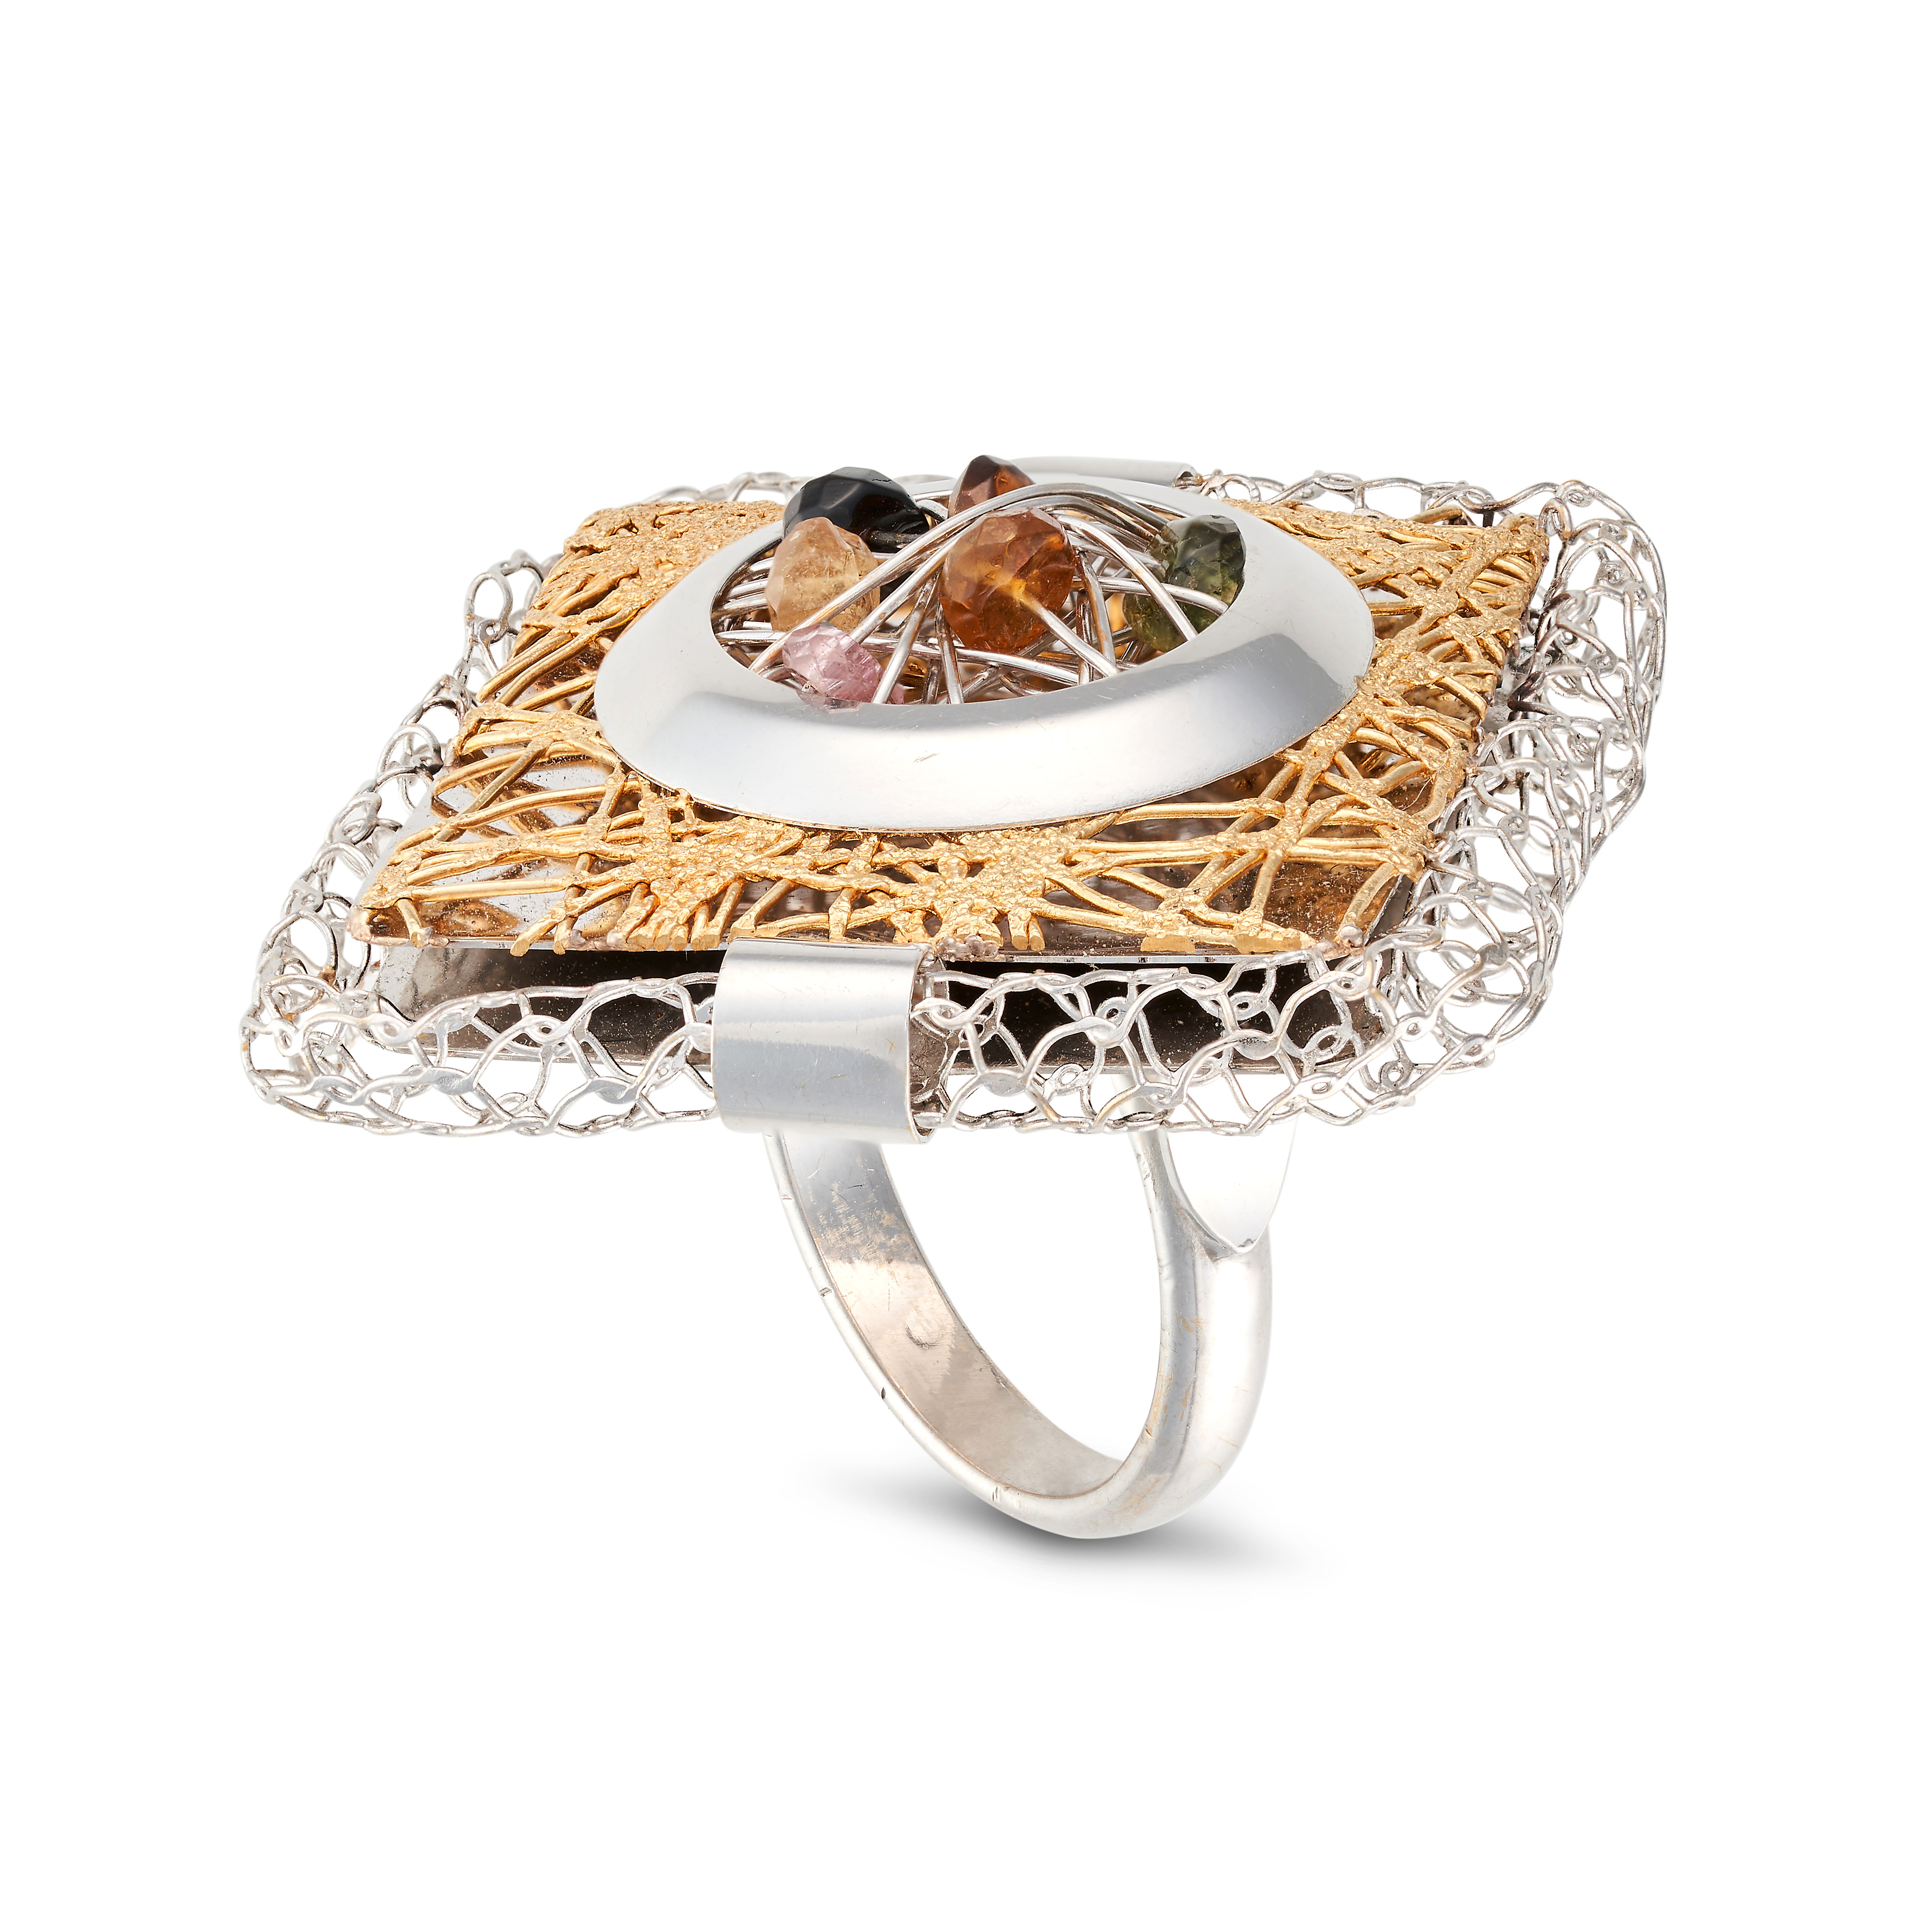 A GEMSET RING the stylised square ring set with a cluster of pink tourmaline, citrine and zircon ... - Image 2 of 2